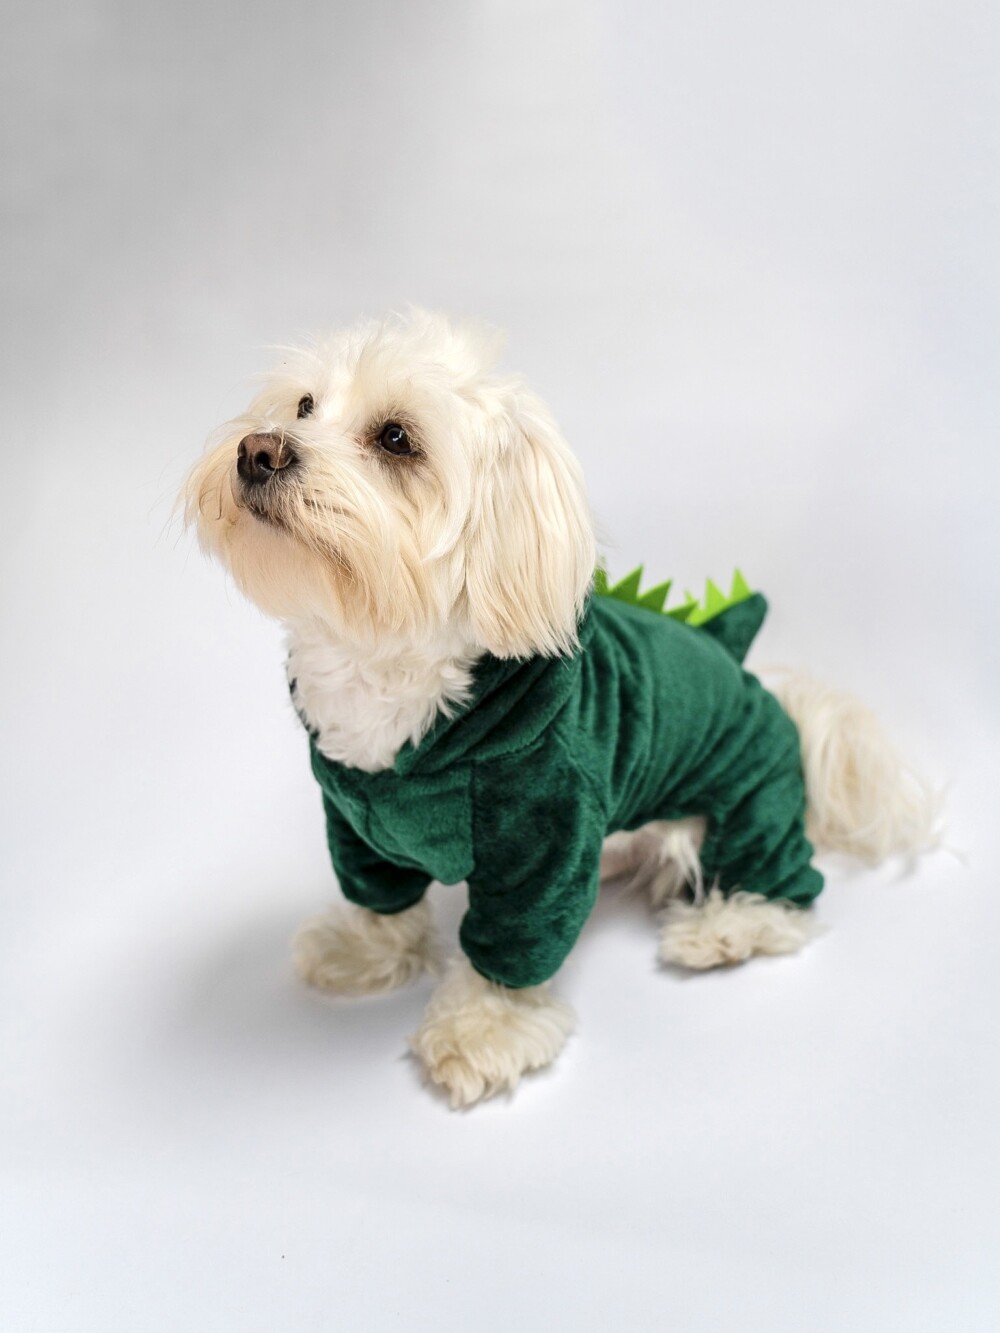 A white fluffy dog wearing a green dinosaur all in one suit